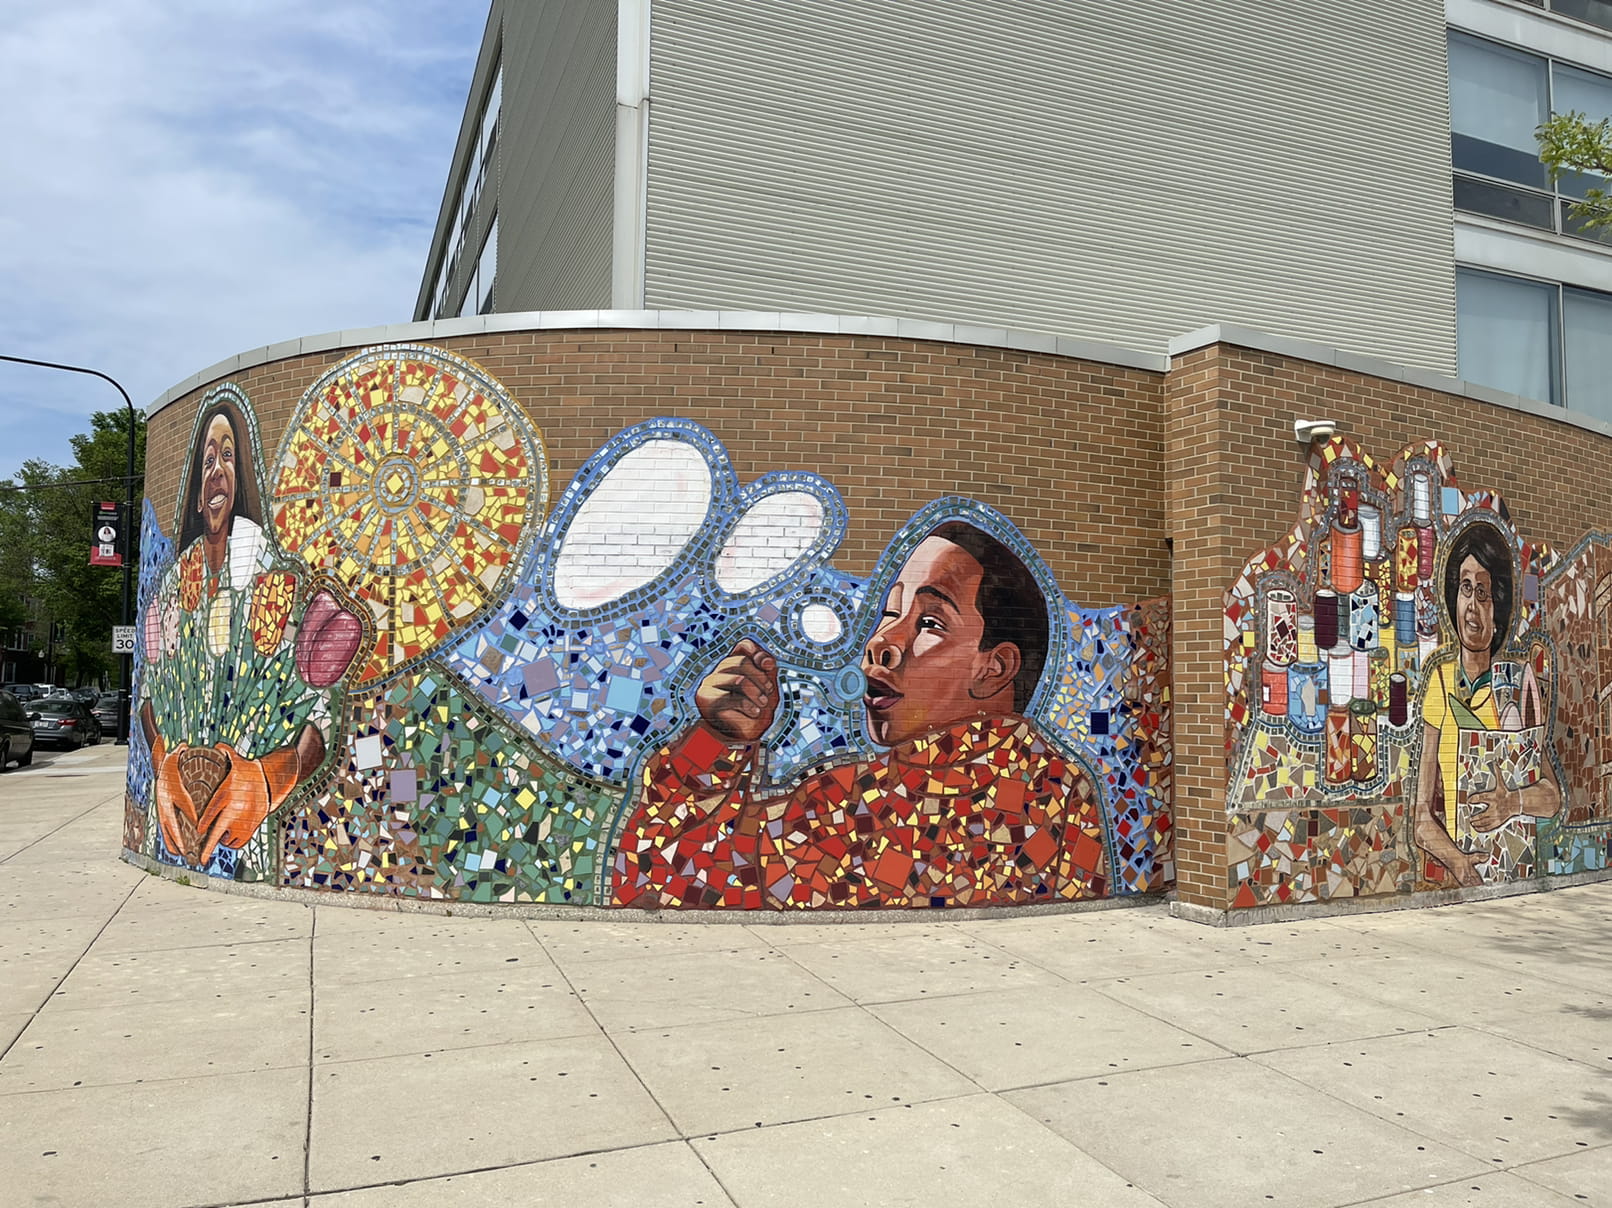 Awesome mural outside a school